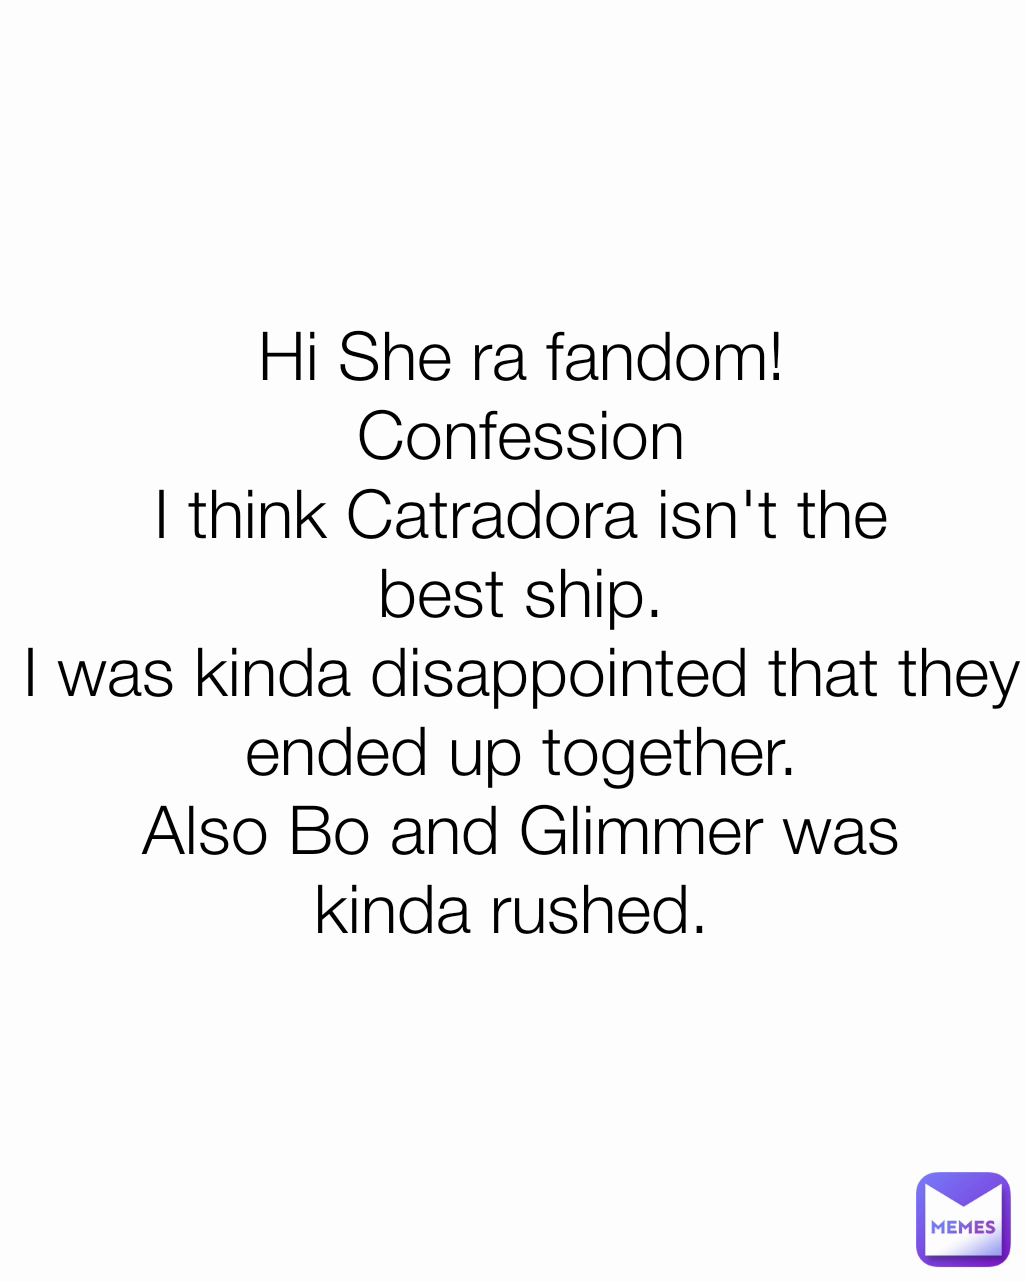 Hi She ra fandom!
Confession
I think Catradora isn't the best ship.
I was kinda disappointed that they ended up together.
Also Bo and Glimmer was kinda rushed. 
